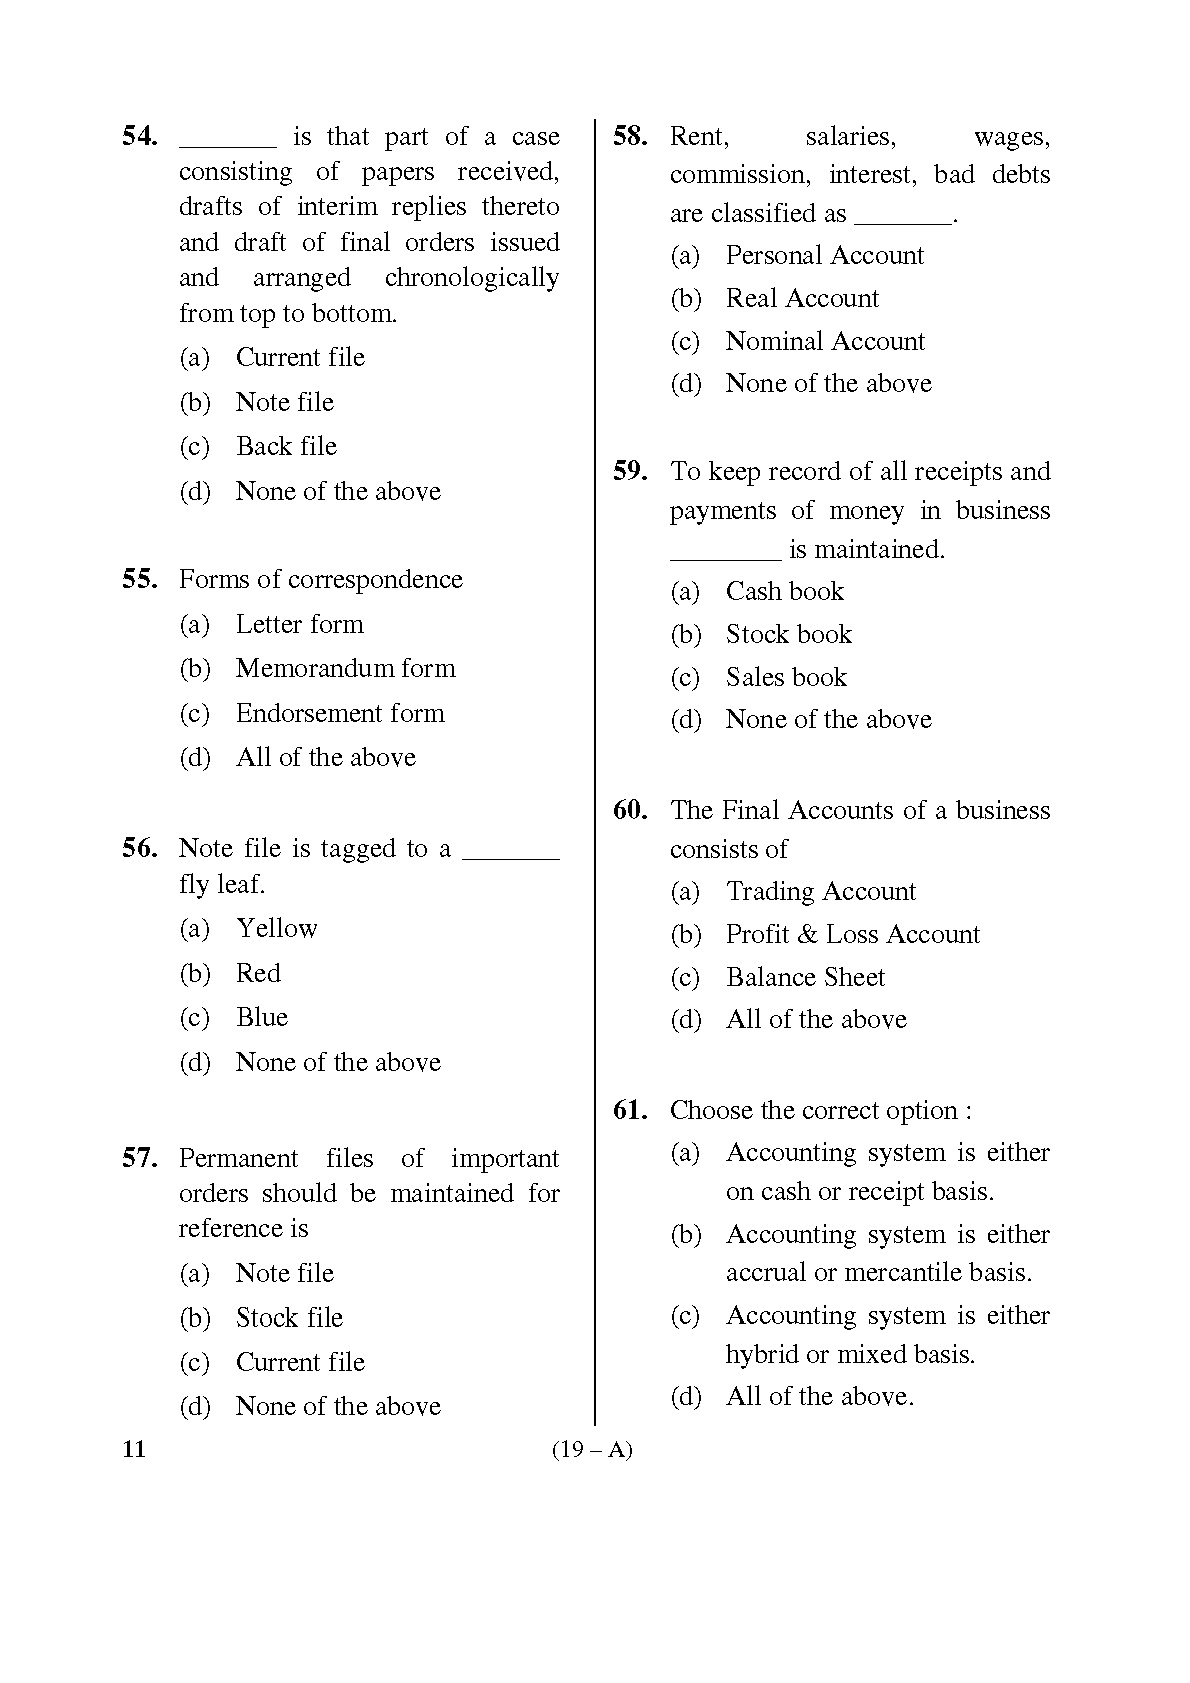 Karnataka PSC First Division Computer Assistants Exam Sample Question Paper 19